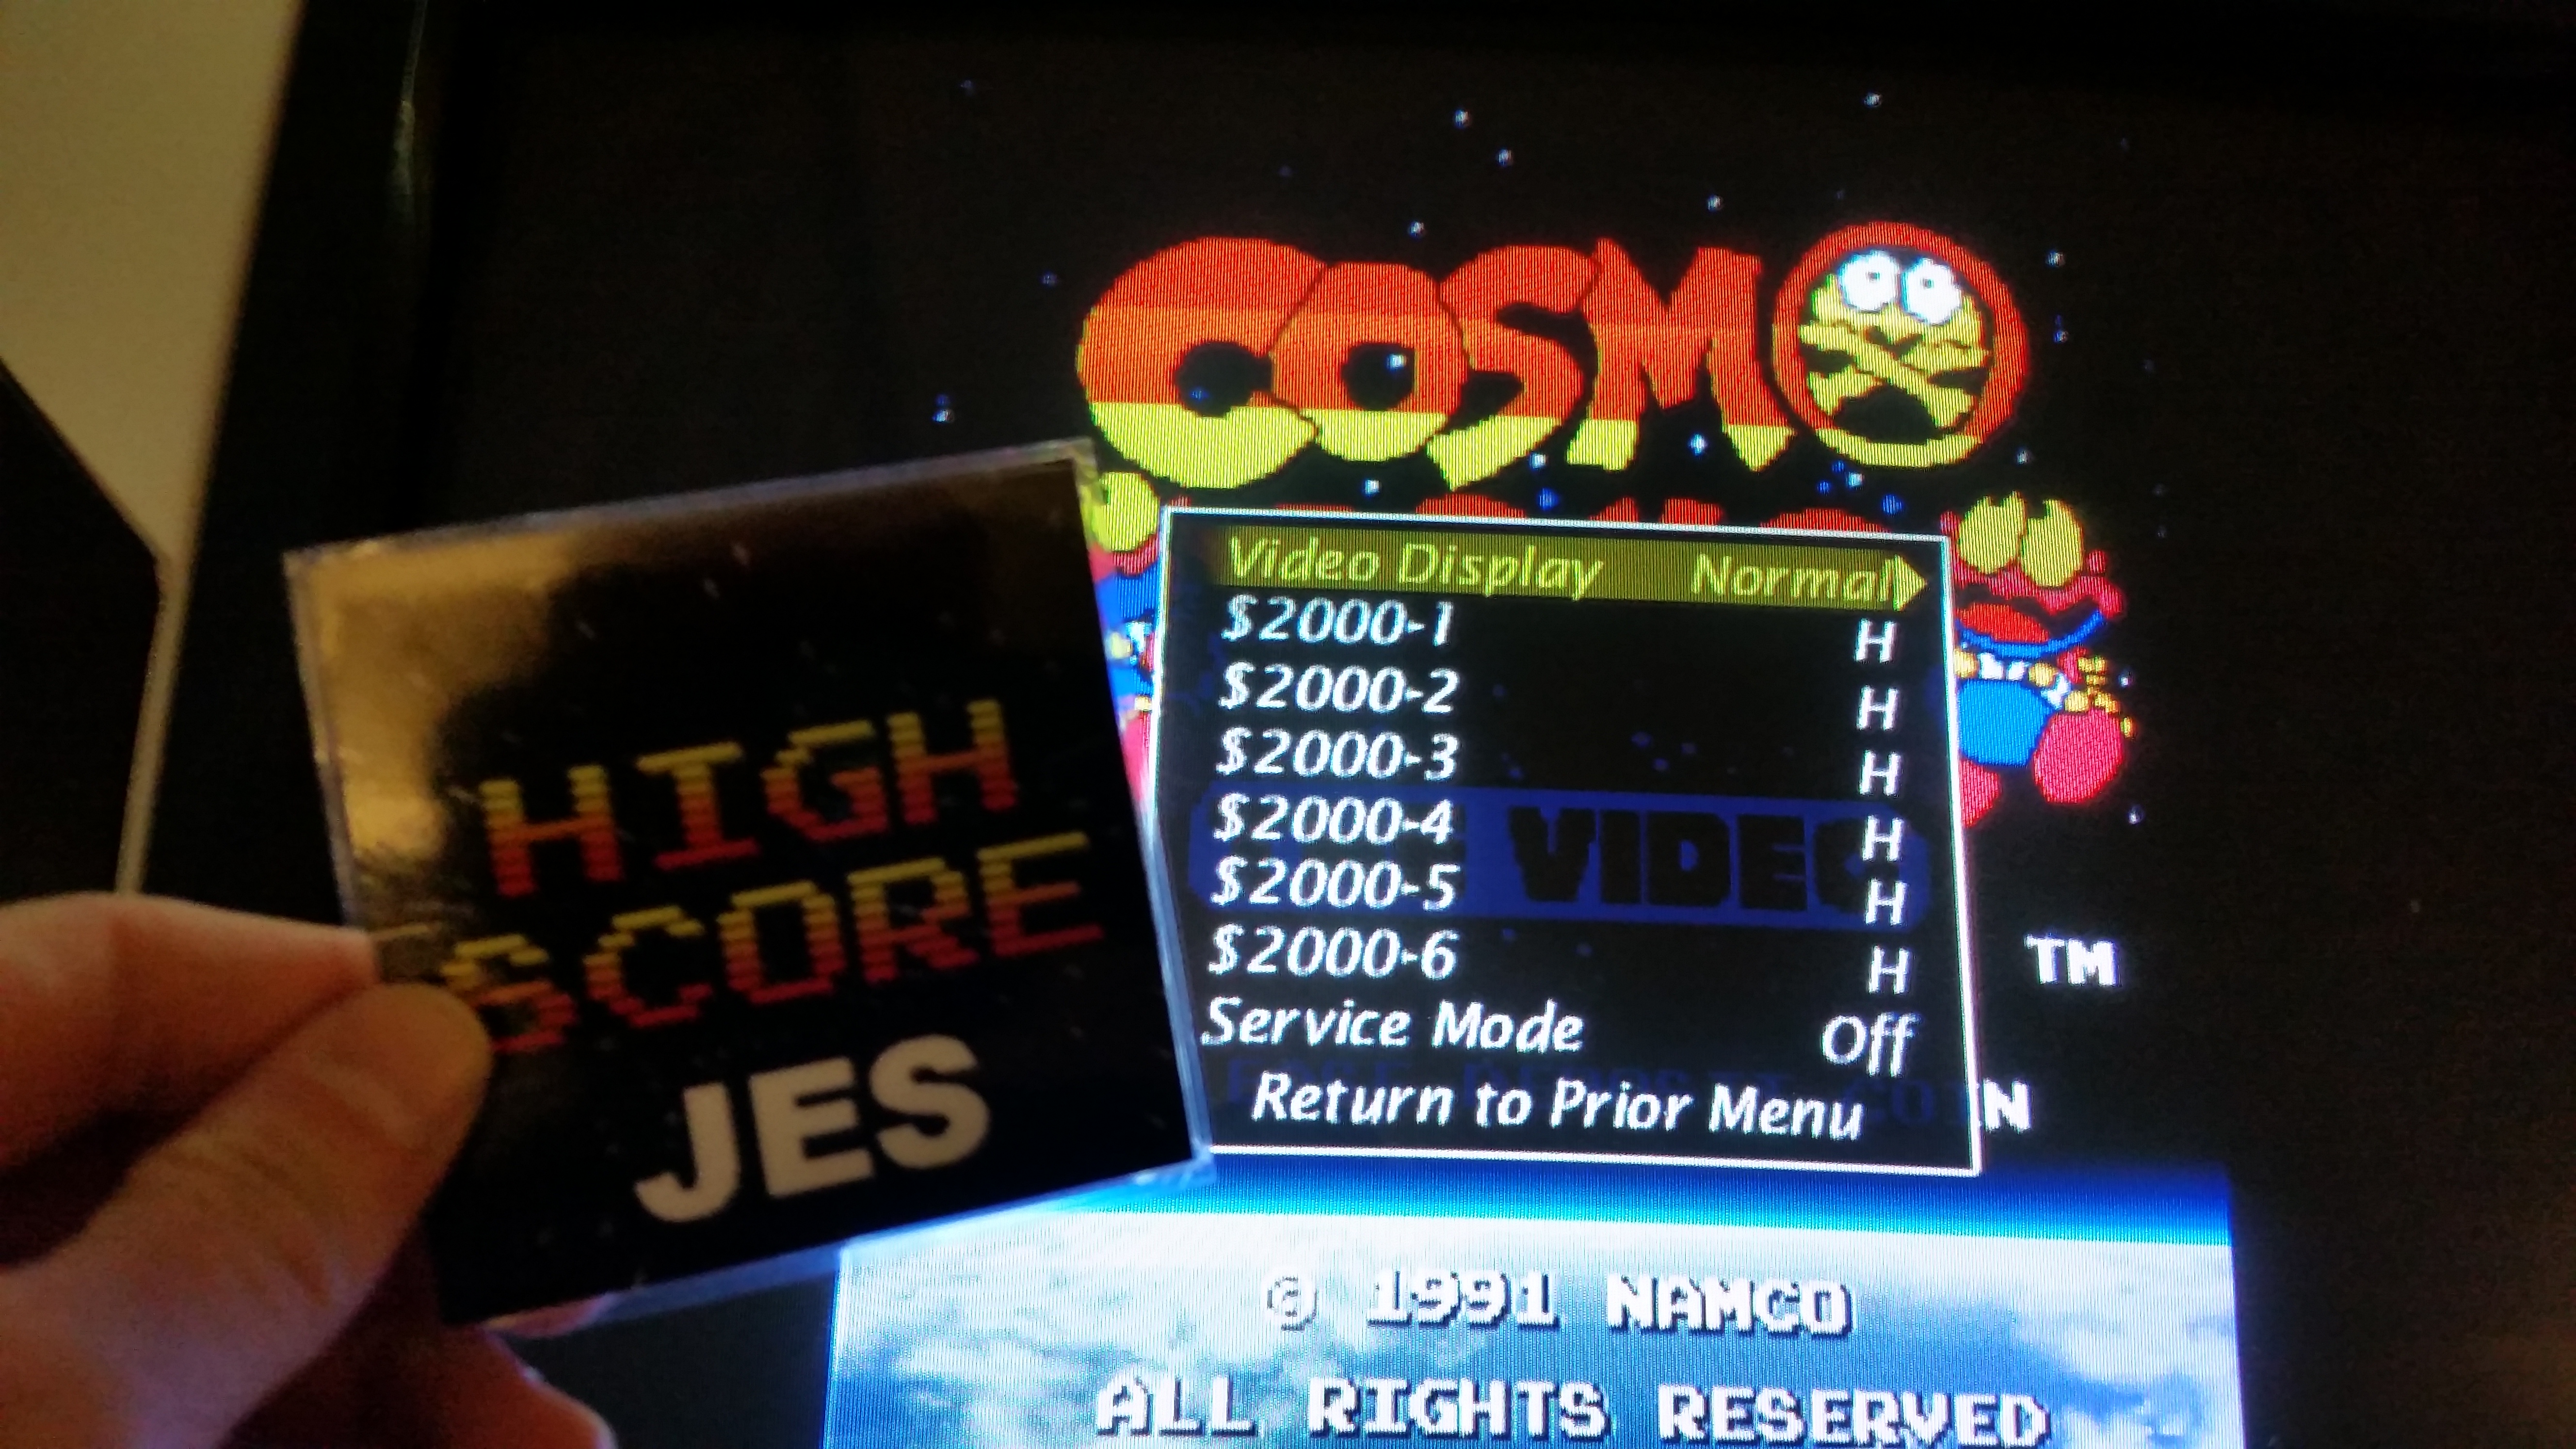 JES: Cosmo Gang the Video [cosmogng] (Arcade Emulated /